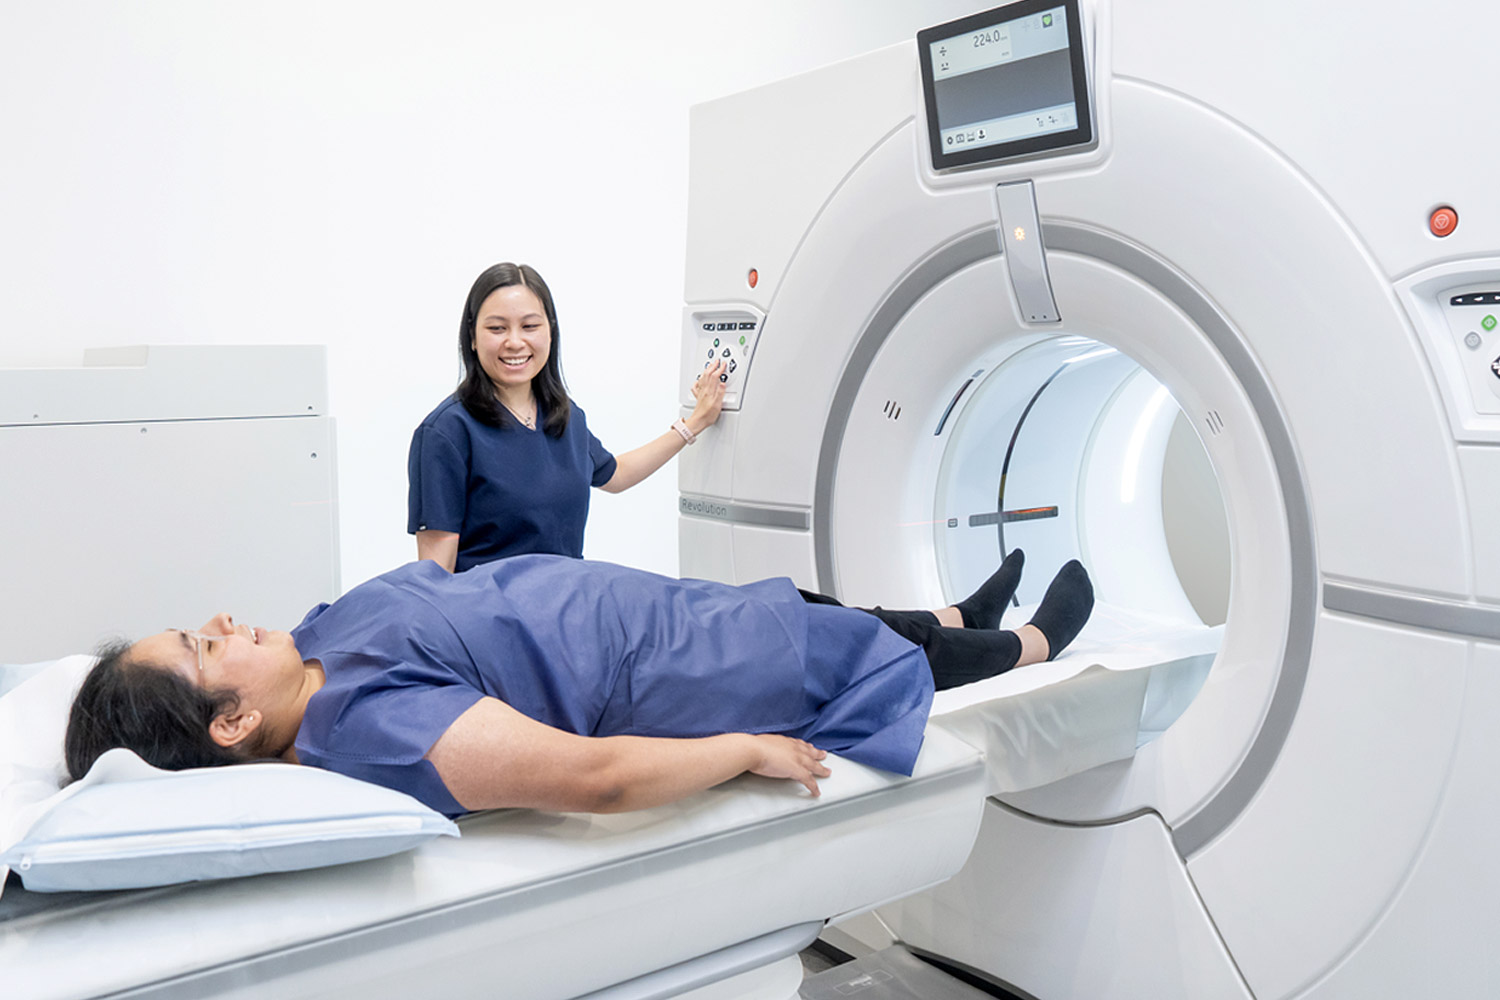 Female Radiologist Preparing Woman for CT Scan | Medical Imaging Services | FMIG